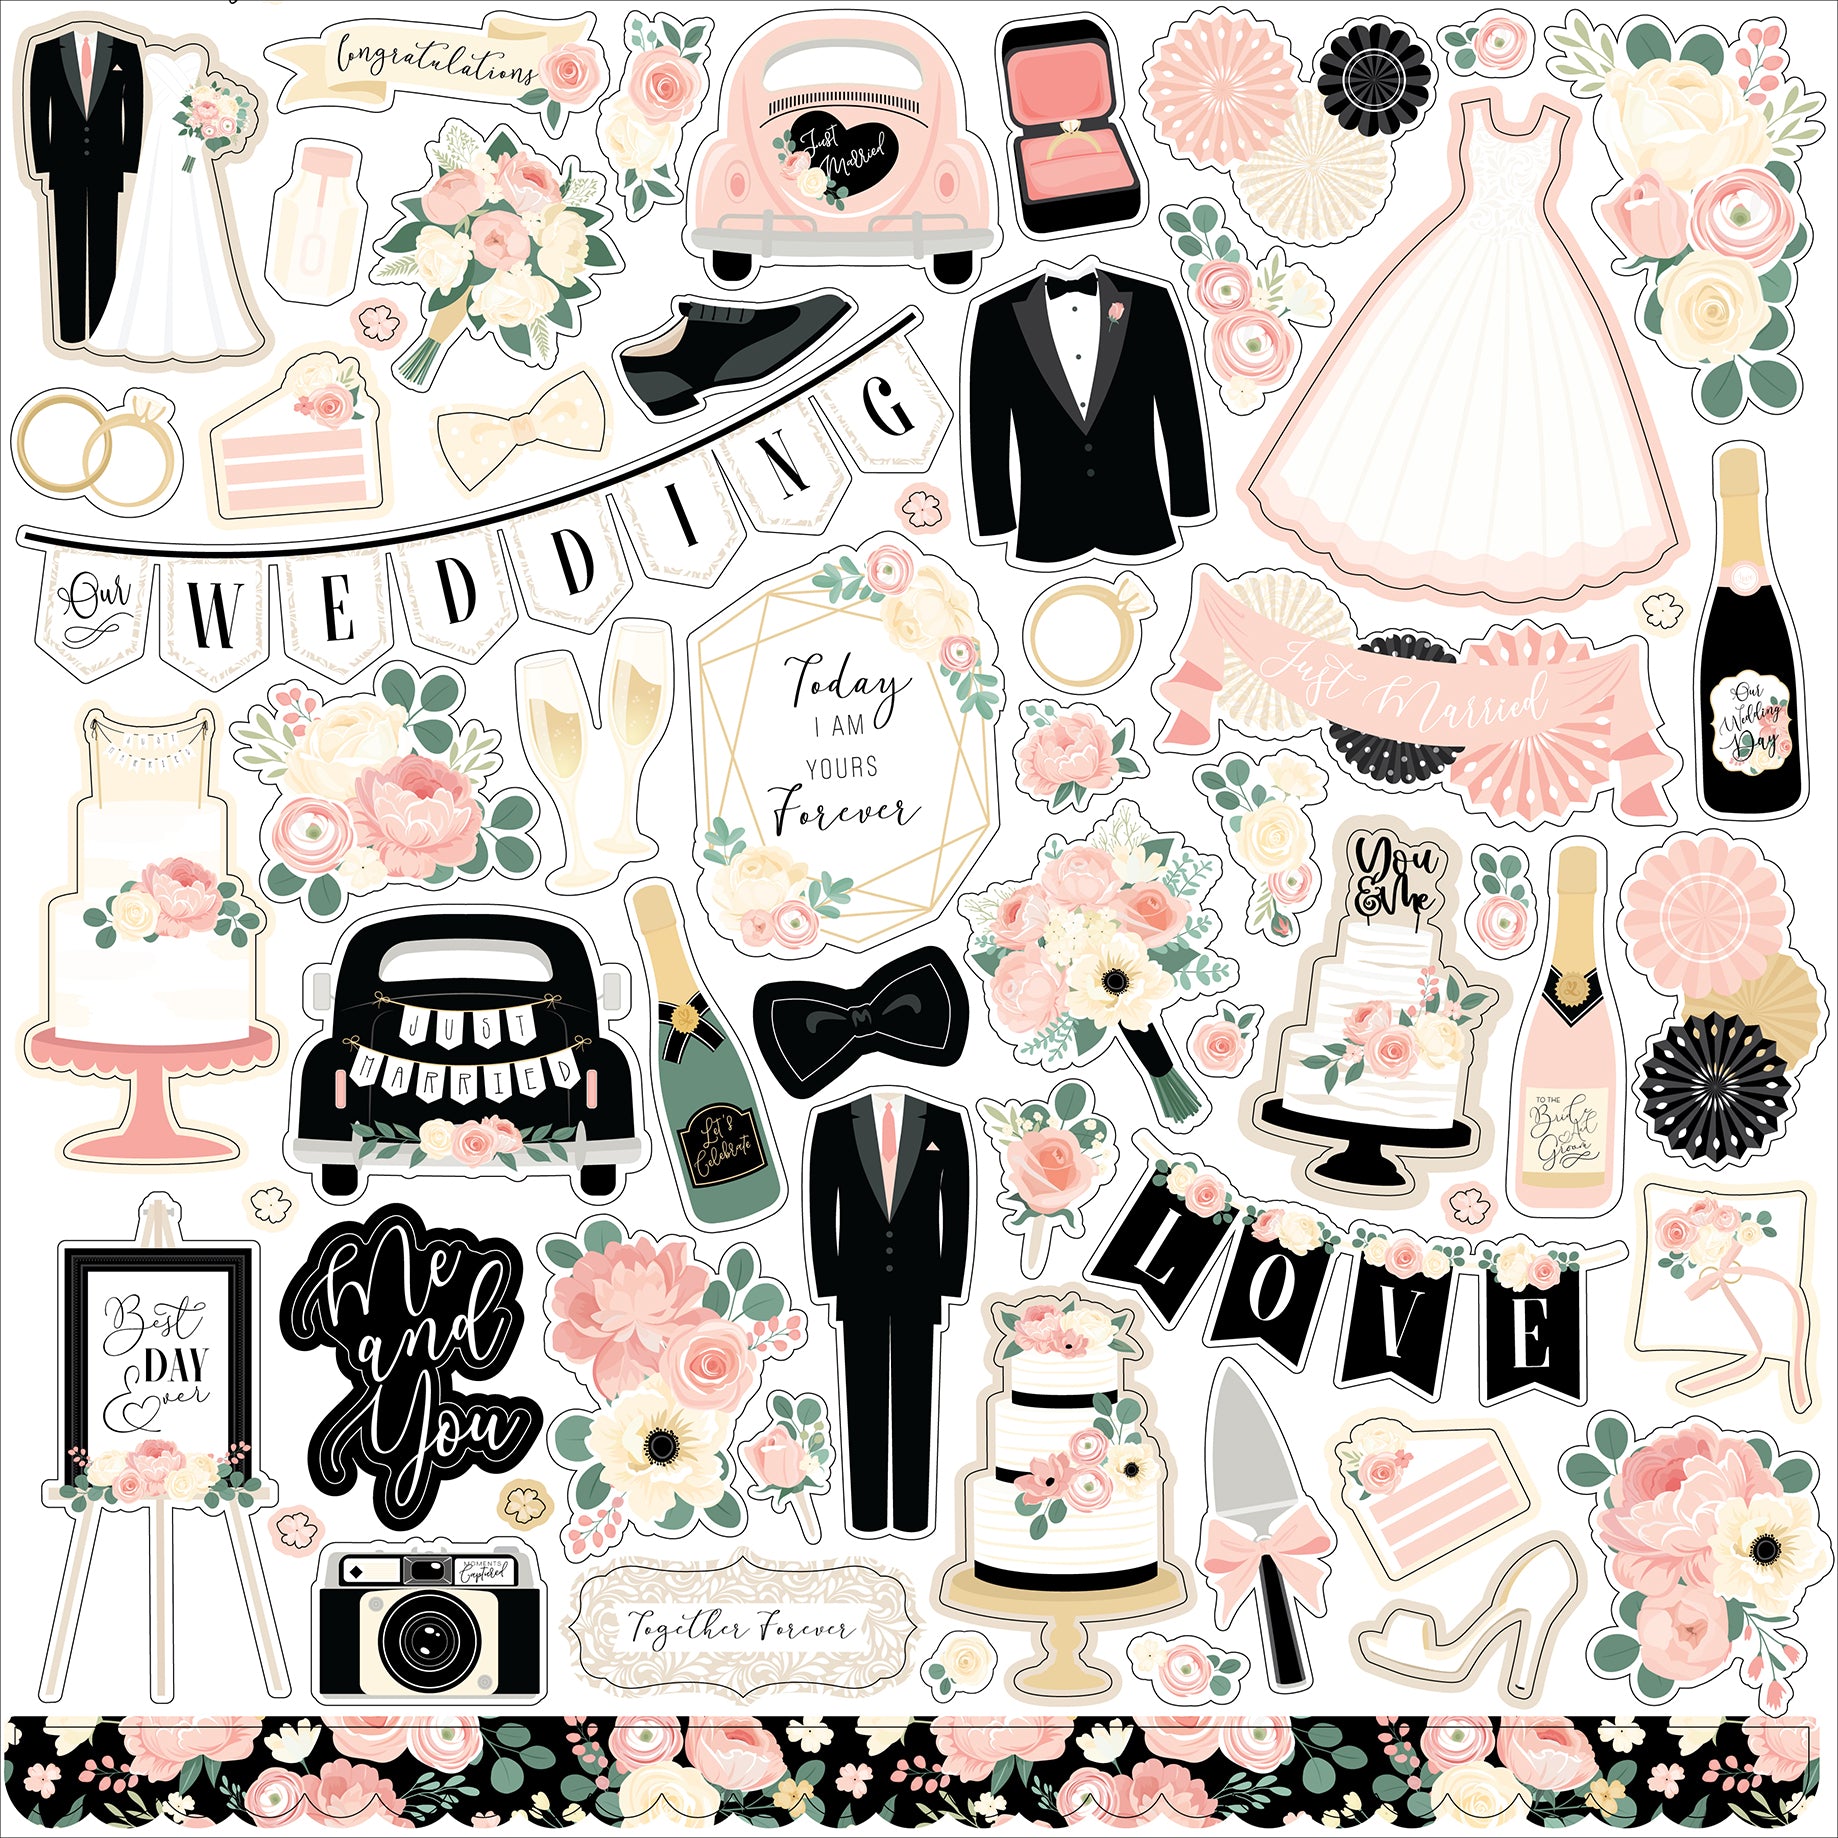 Our Wedding Collection Kit - Echo Park Paper Co.